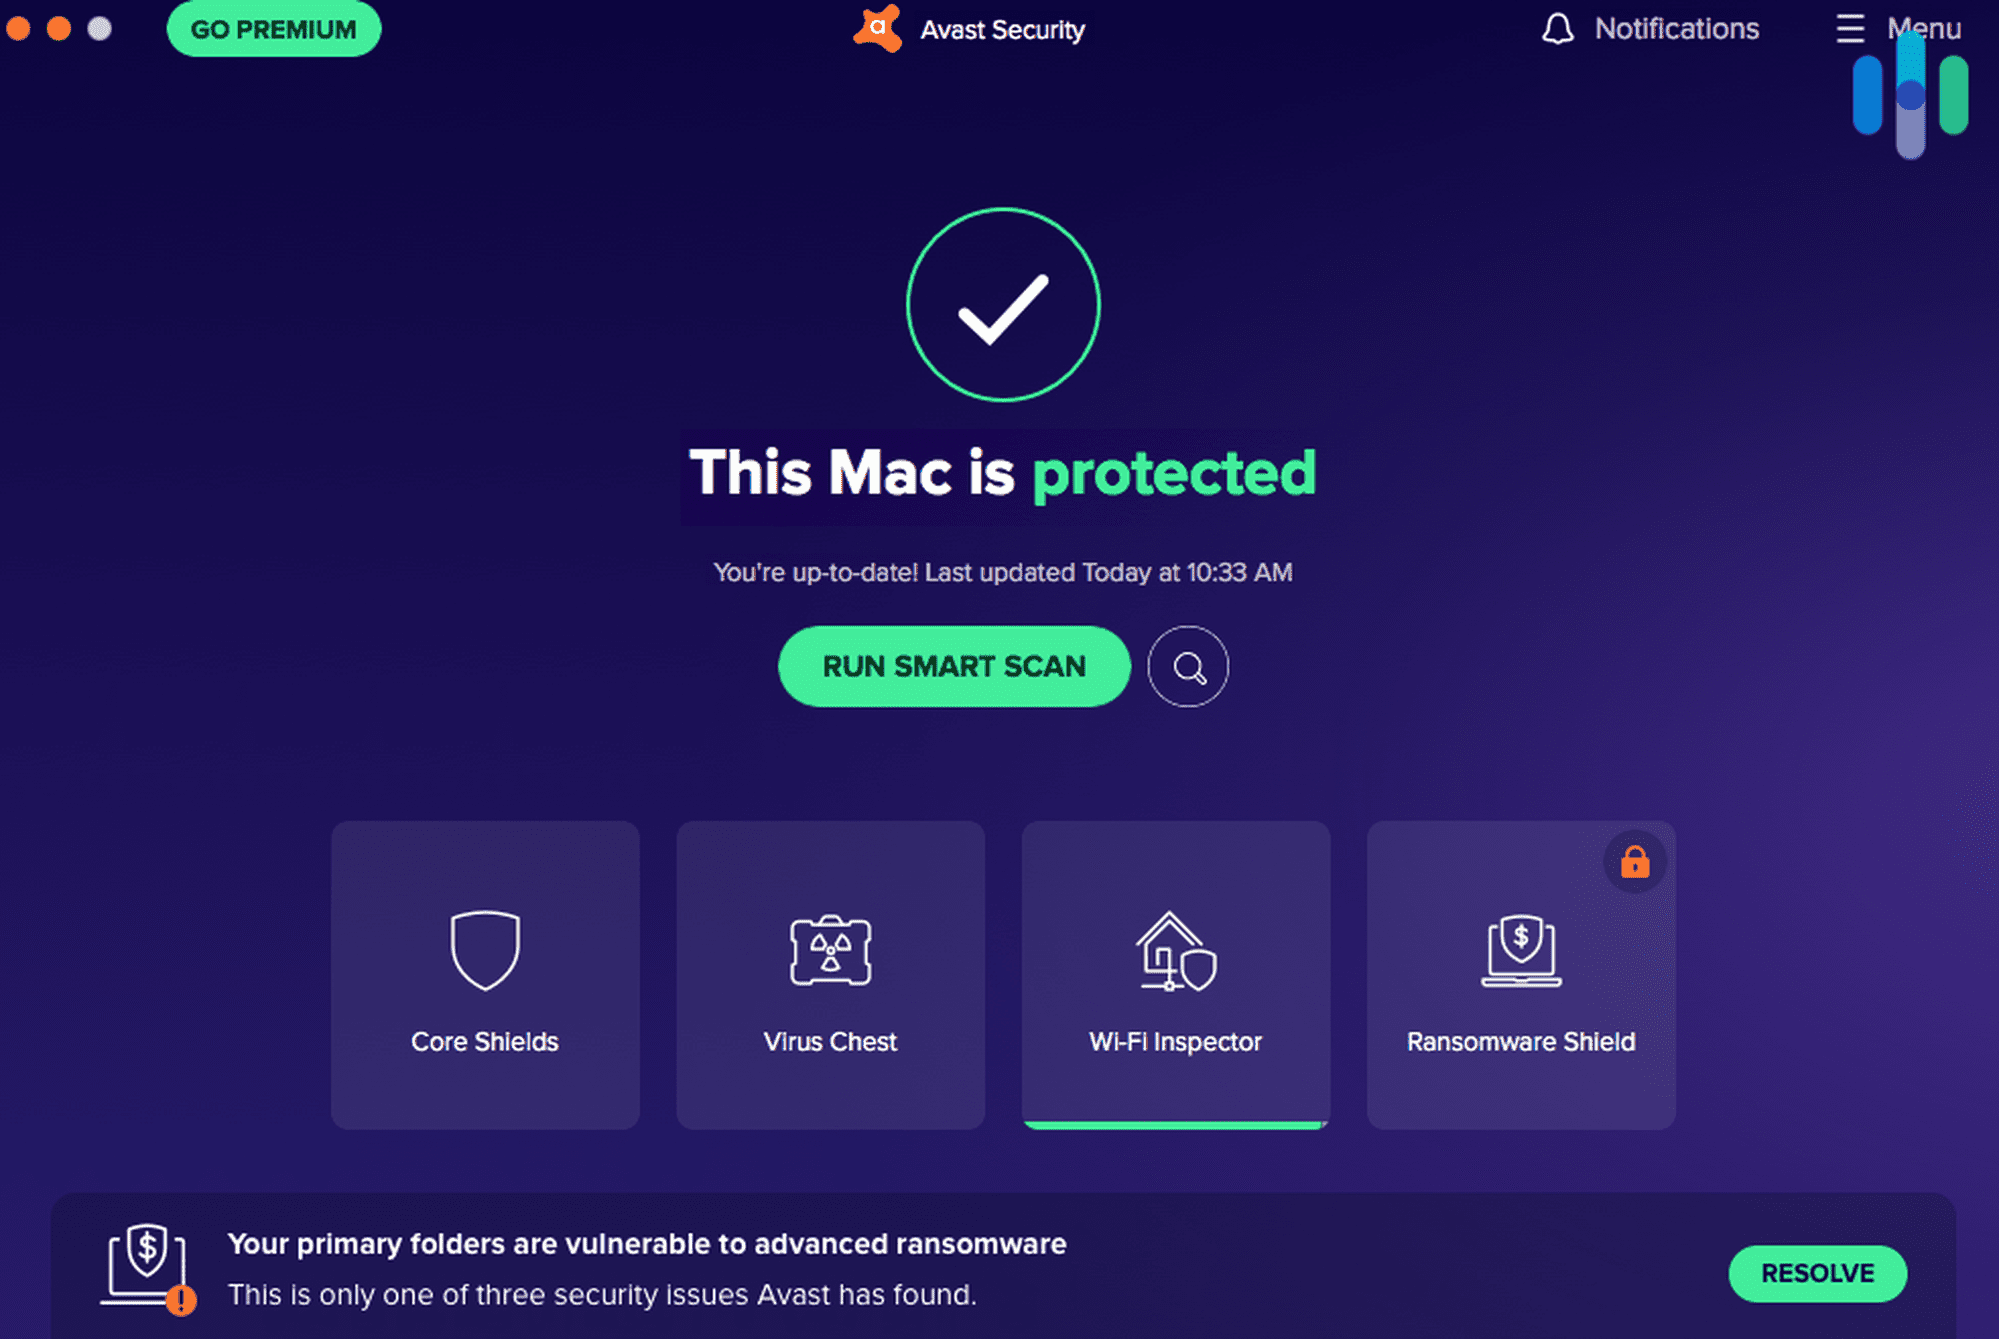 Use Antivirus Software: A good antivirus software can help protect your Mac against malware and other threats that can cause data loss.
Avoid Untrusted Websites: Be careful when downloading files or clicking on links from websites you don't trust, as they may contain viruses or other malicious software.